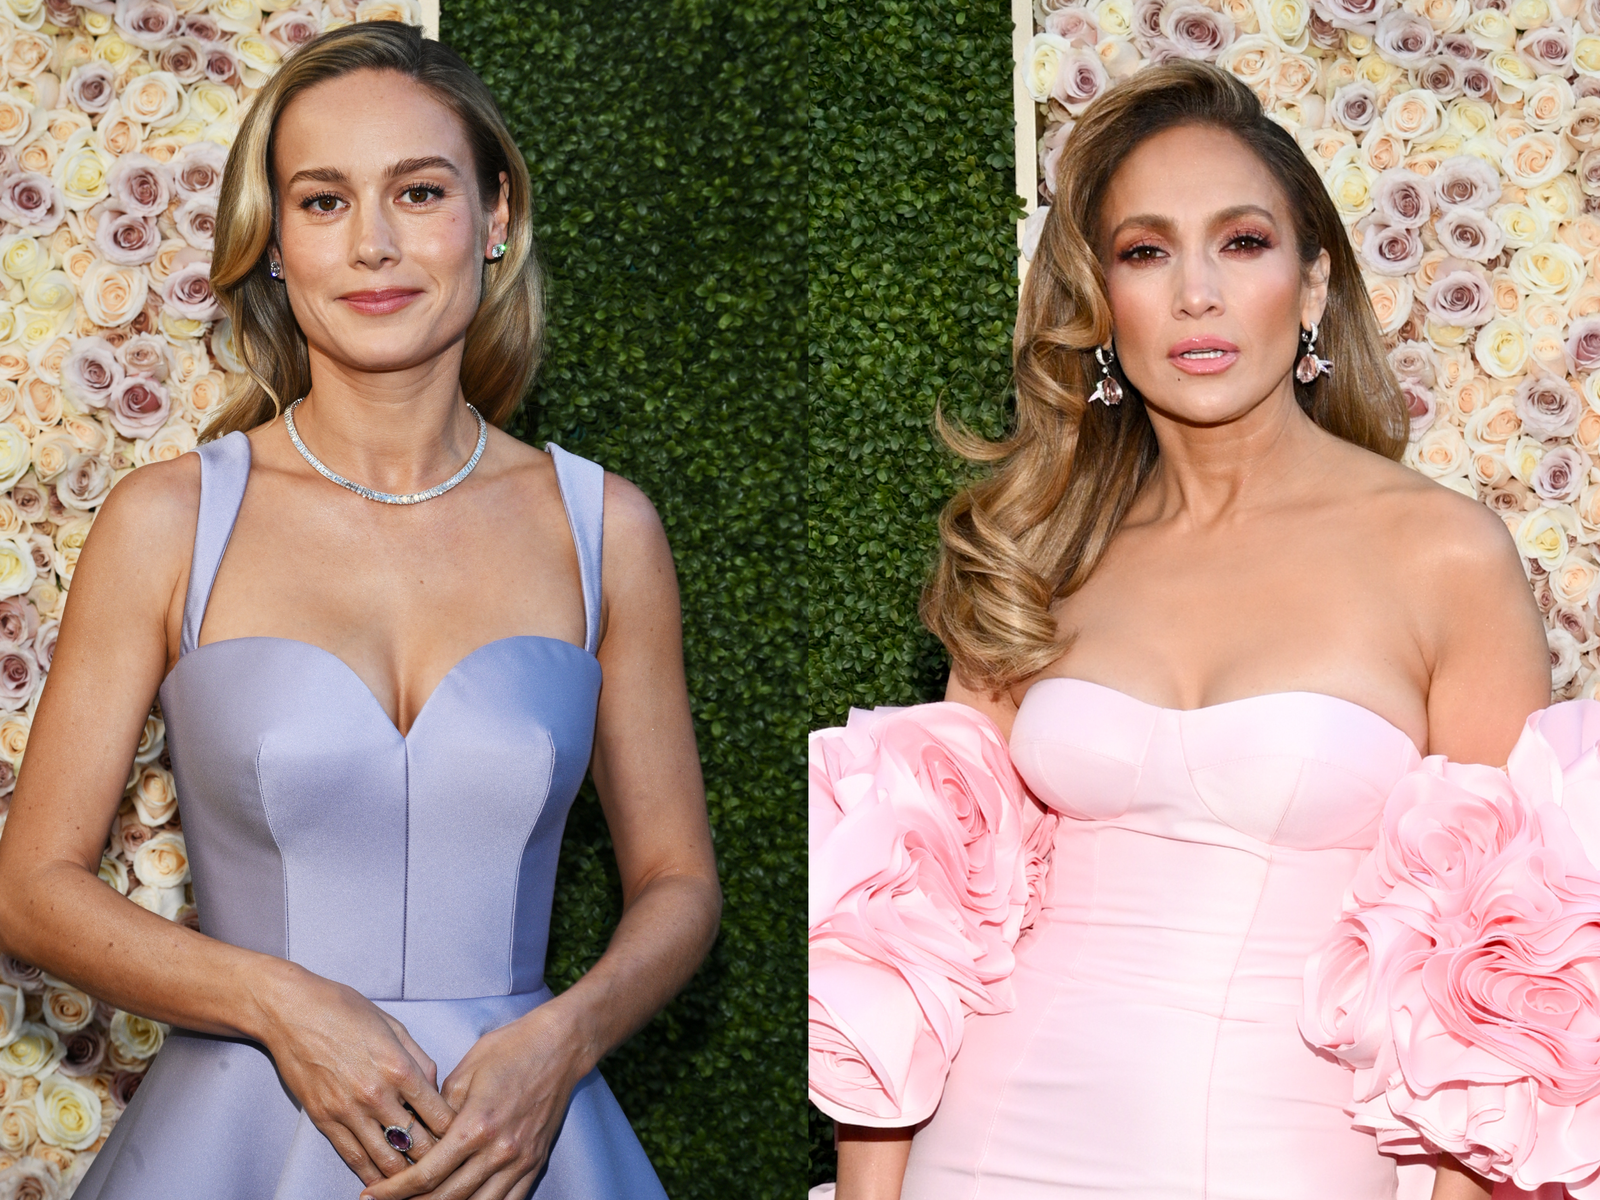 Brie Larson Started Crying and Hyperventilating When She Met Her Hero, J.Lo, at the Golden Globes